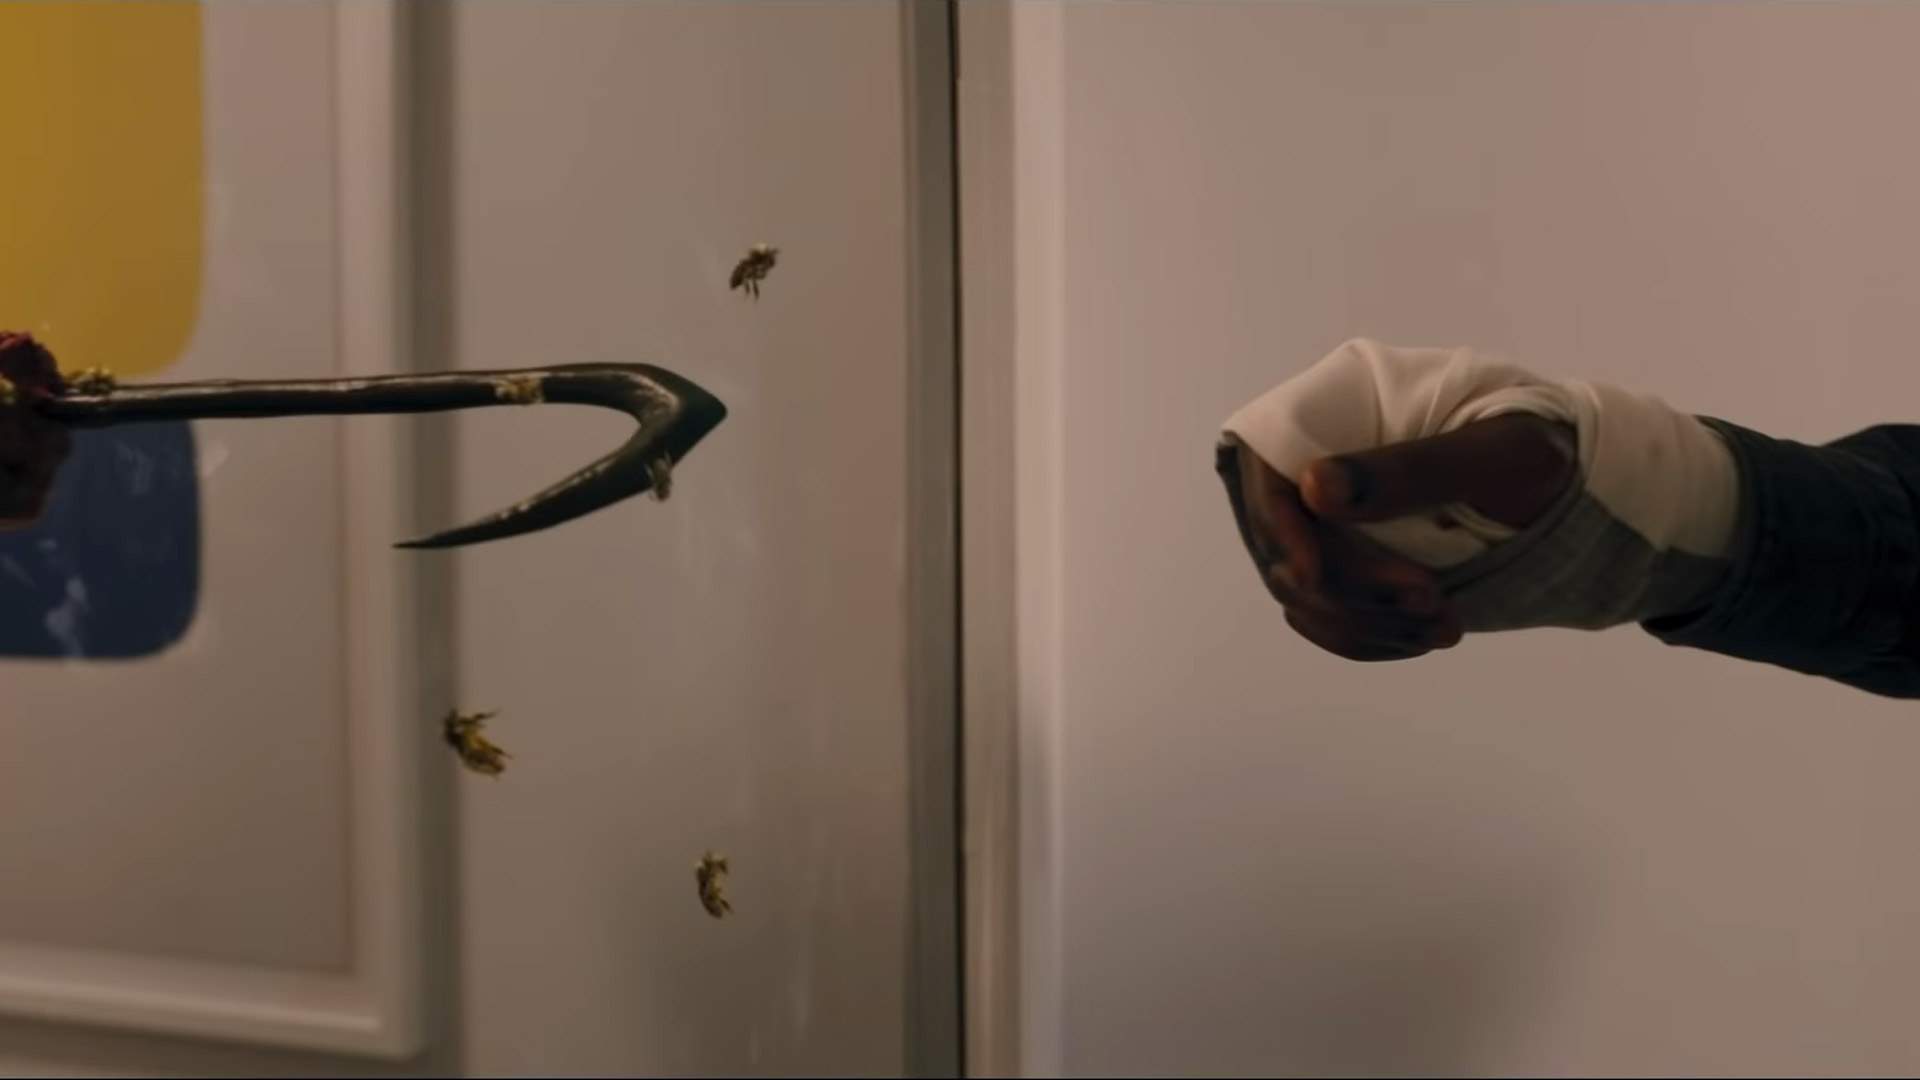 The First Unsettling Trailer for Jordan Peele's New 'Candyman' Sequel Is Here